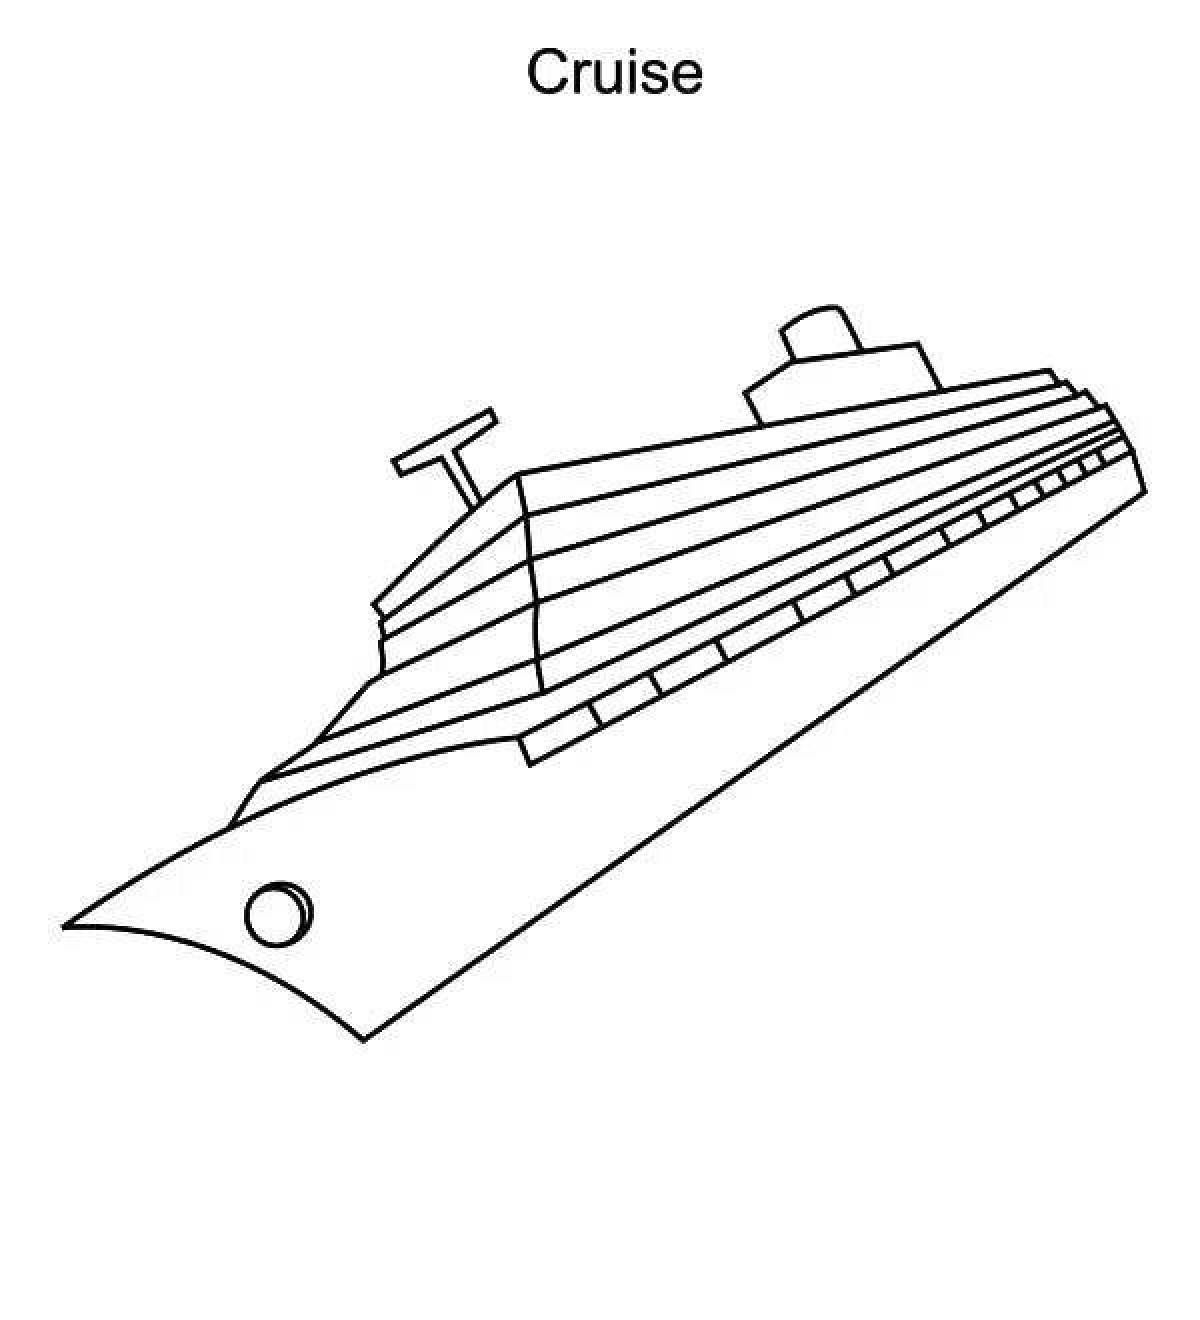 Coloring page generous cruise ship